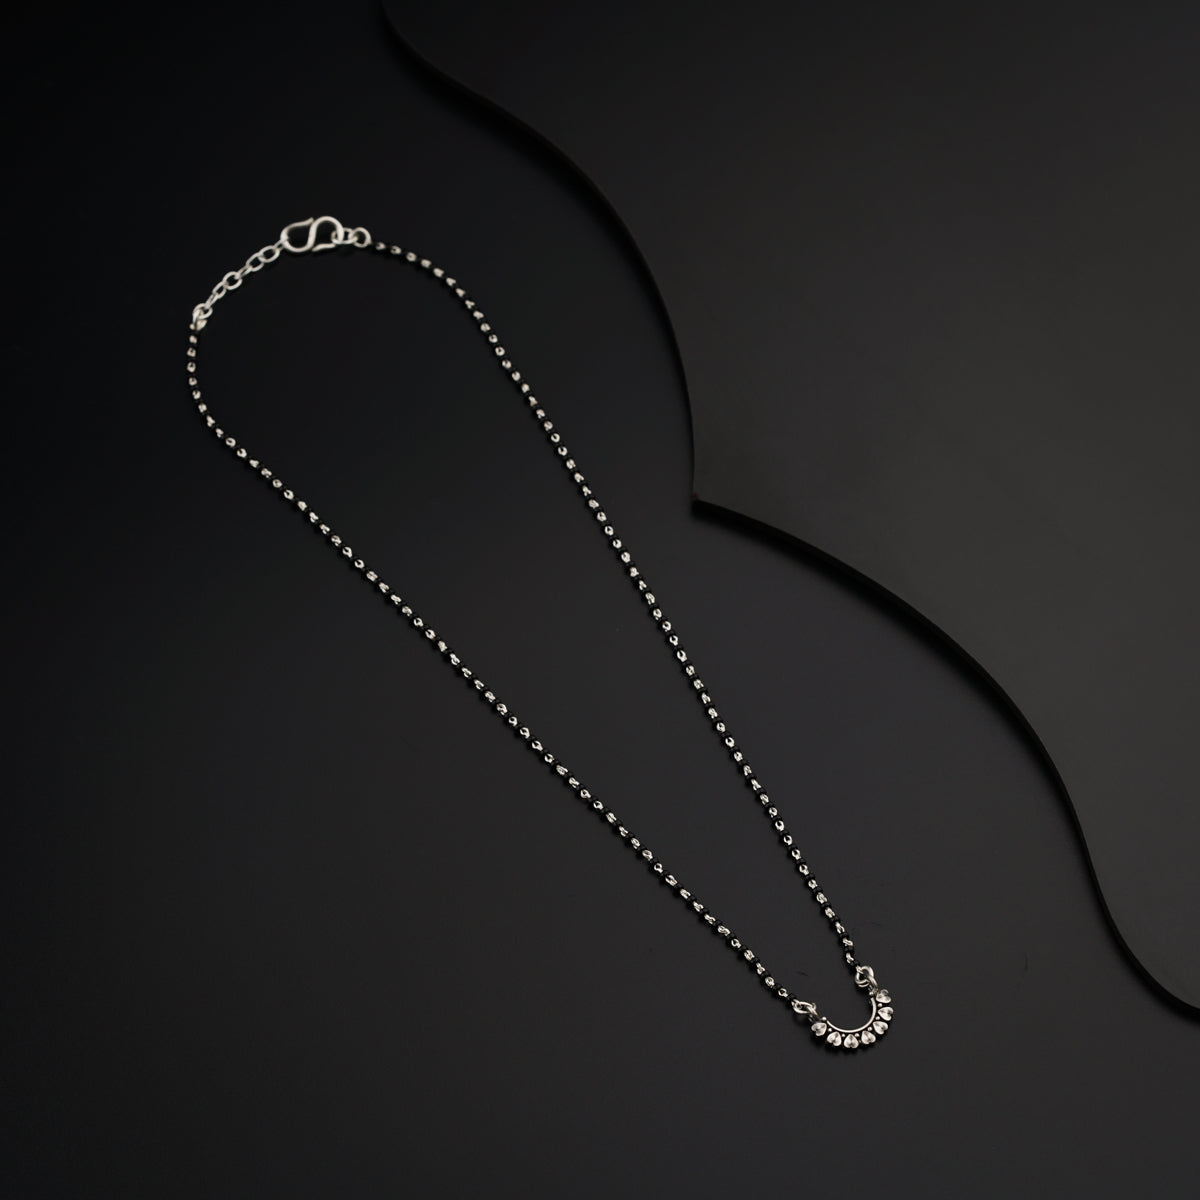 a silver necklace with a chain on a black background